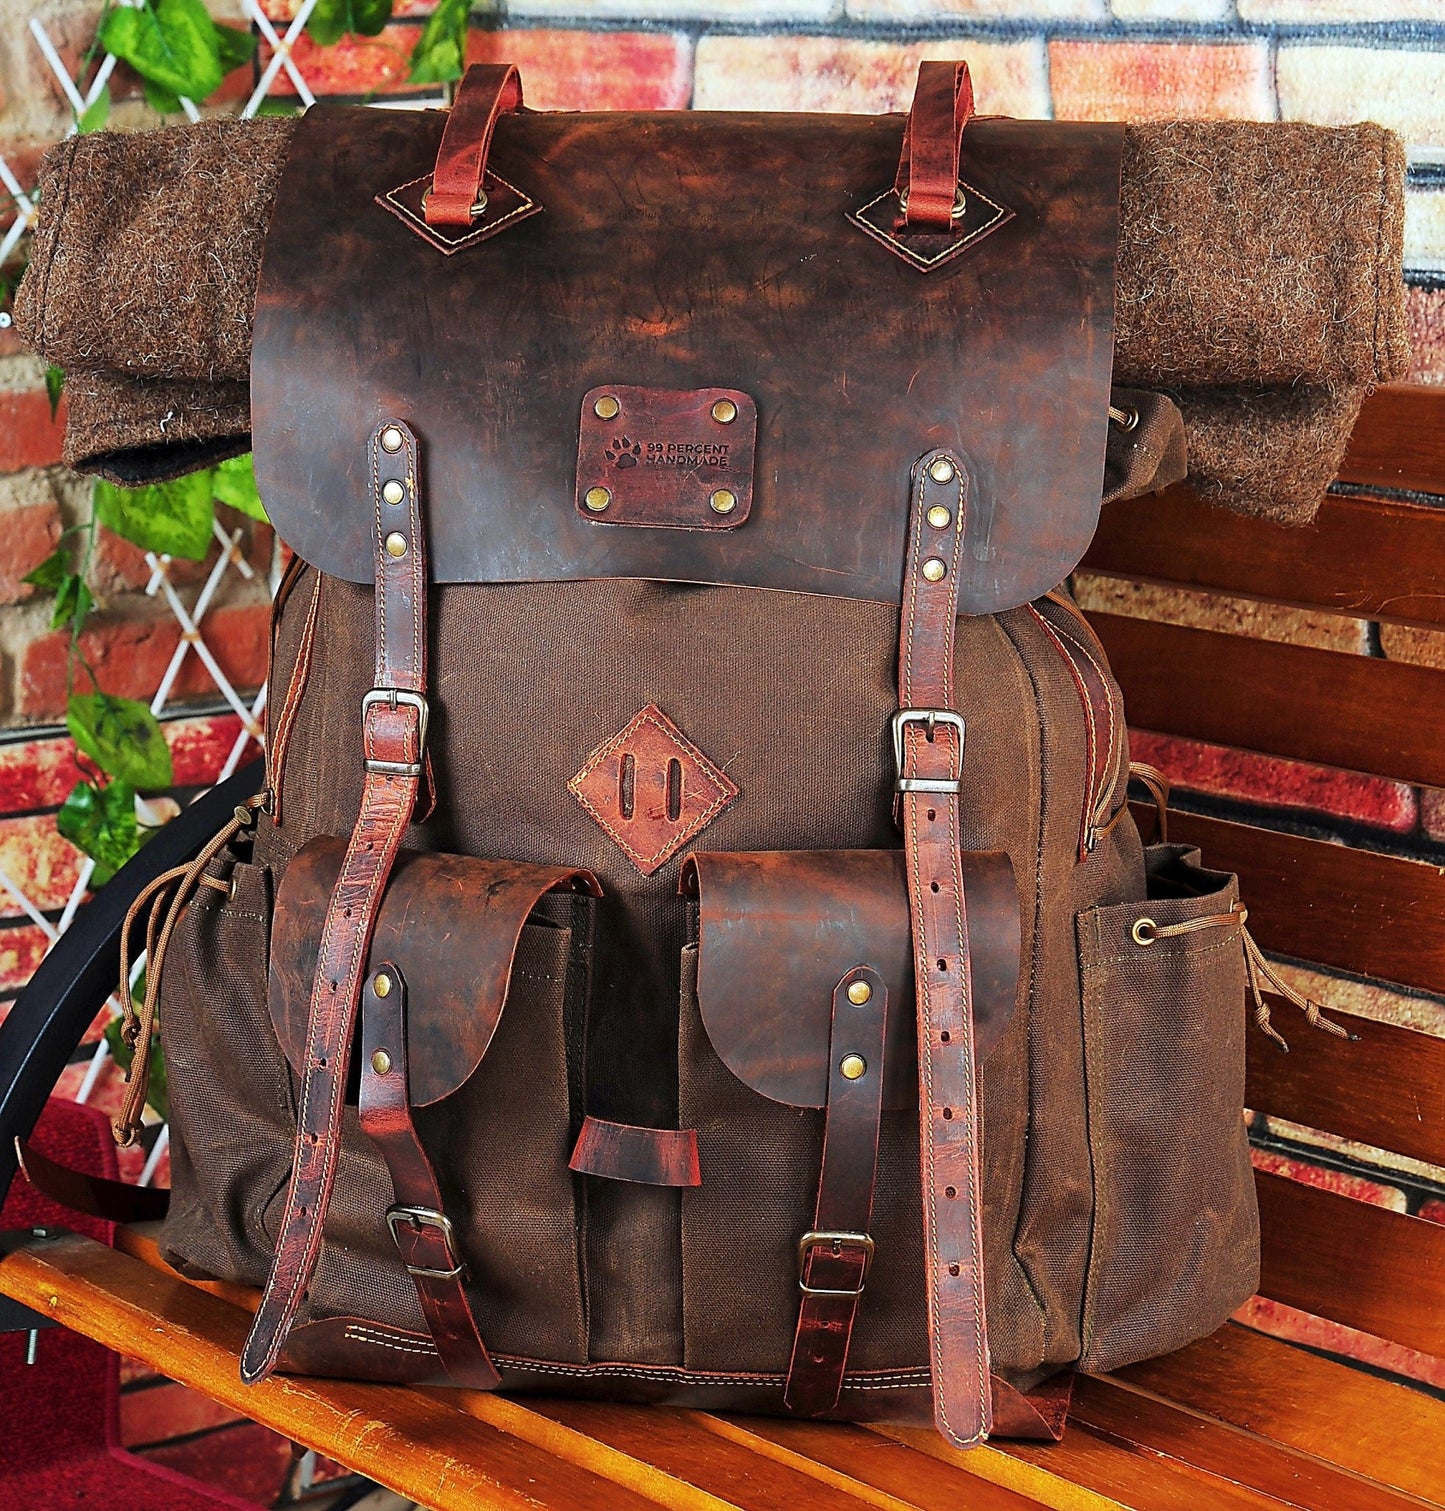 Handmade Camping Waxed Canvas Backpack with Black-Brown-Green and 30 to 80 Liter Options, Front Pocket with Zipper,  Bushcraft, Camping,  99percenthandmade   